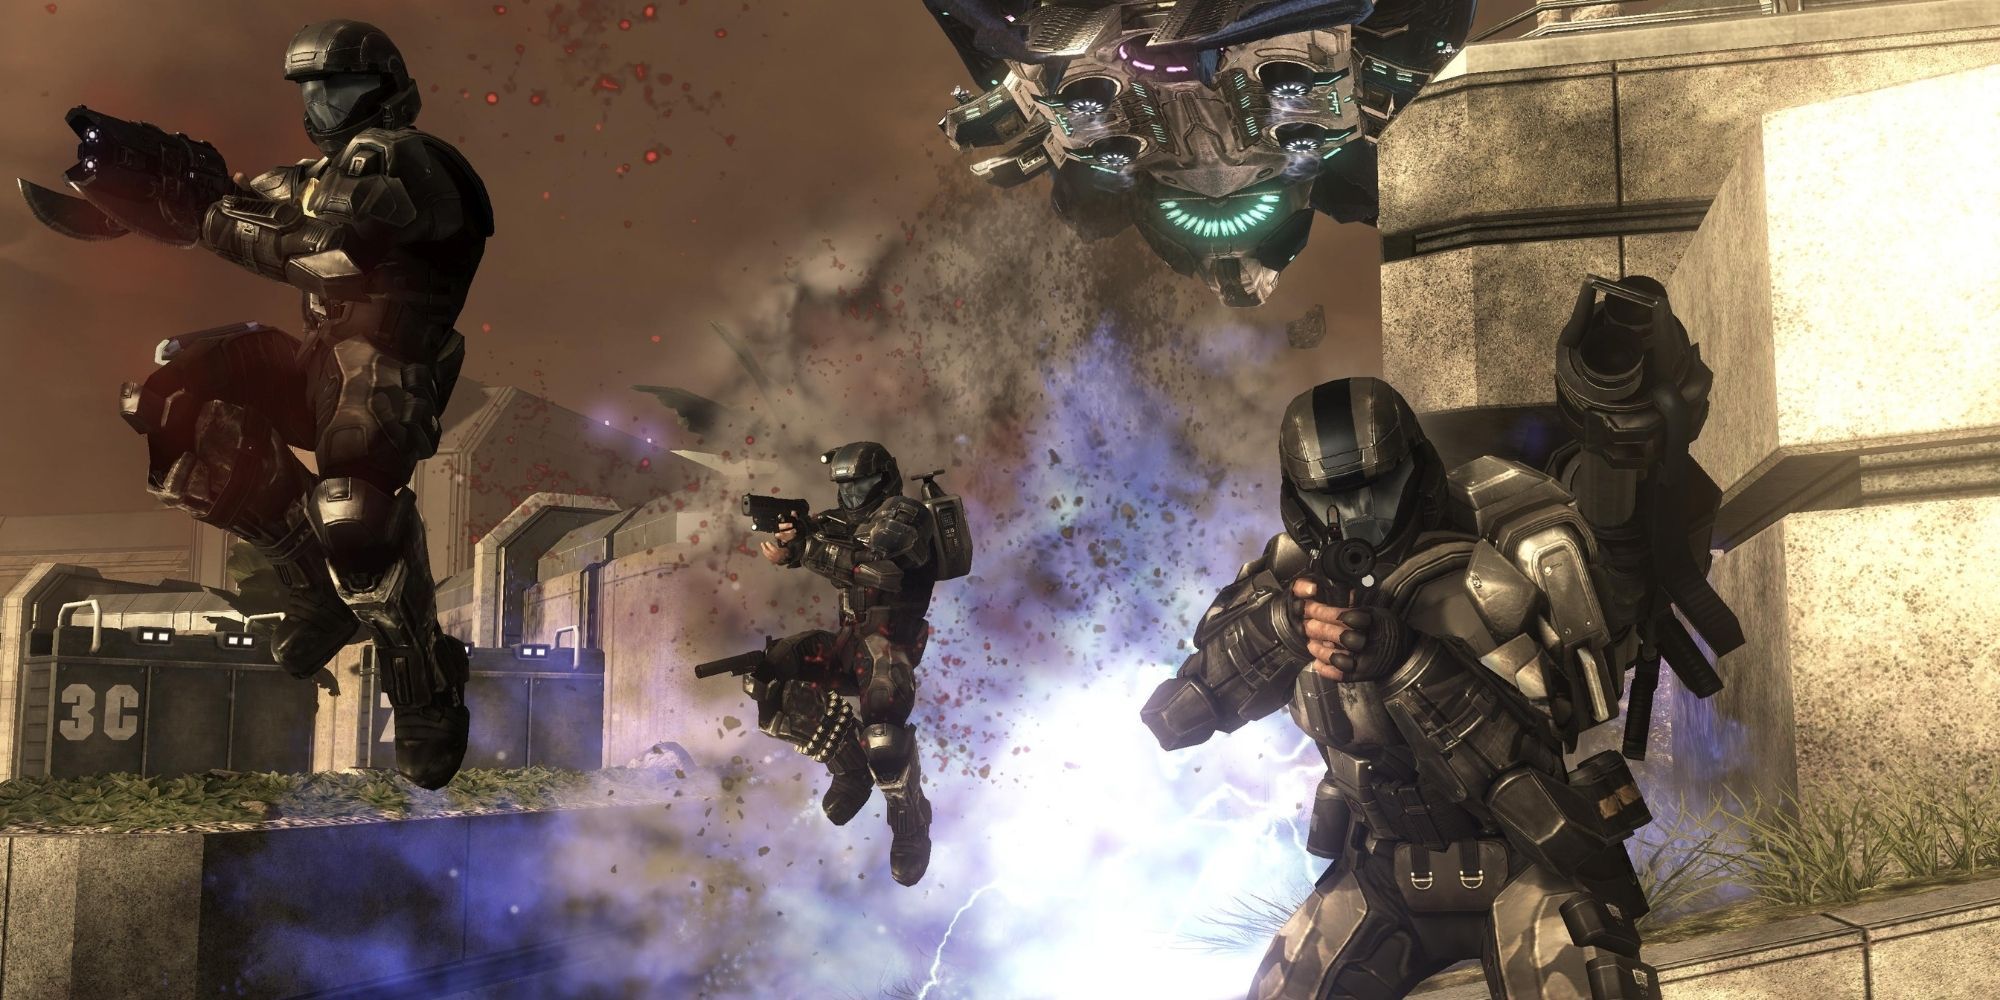 Halo 3 Multiplayer, Promo shot of 3 ODST soldiers dropping to the ground with weapons out